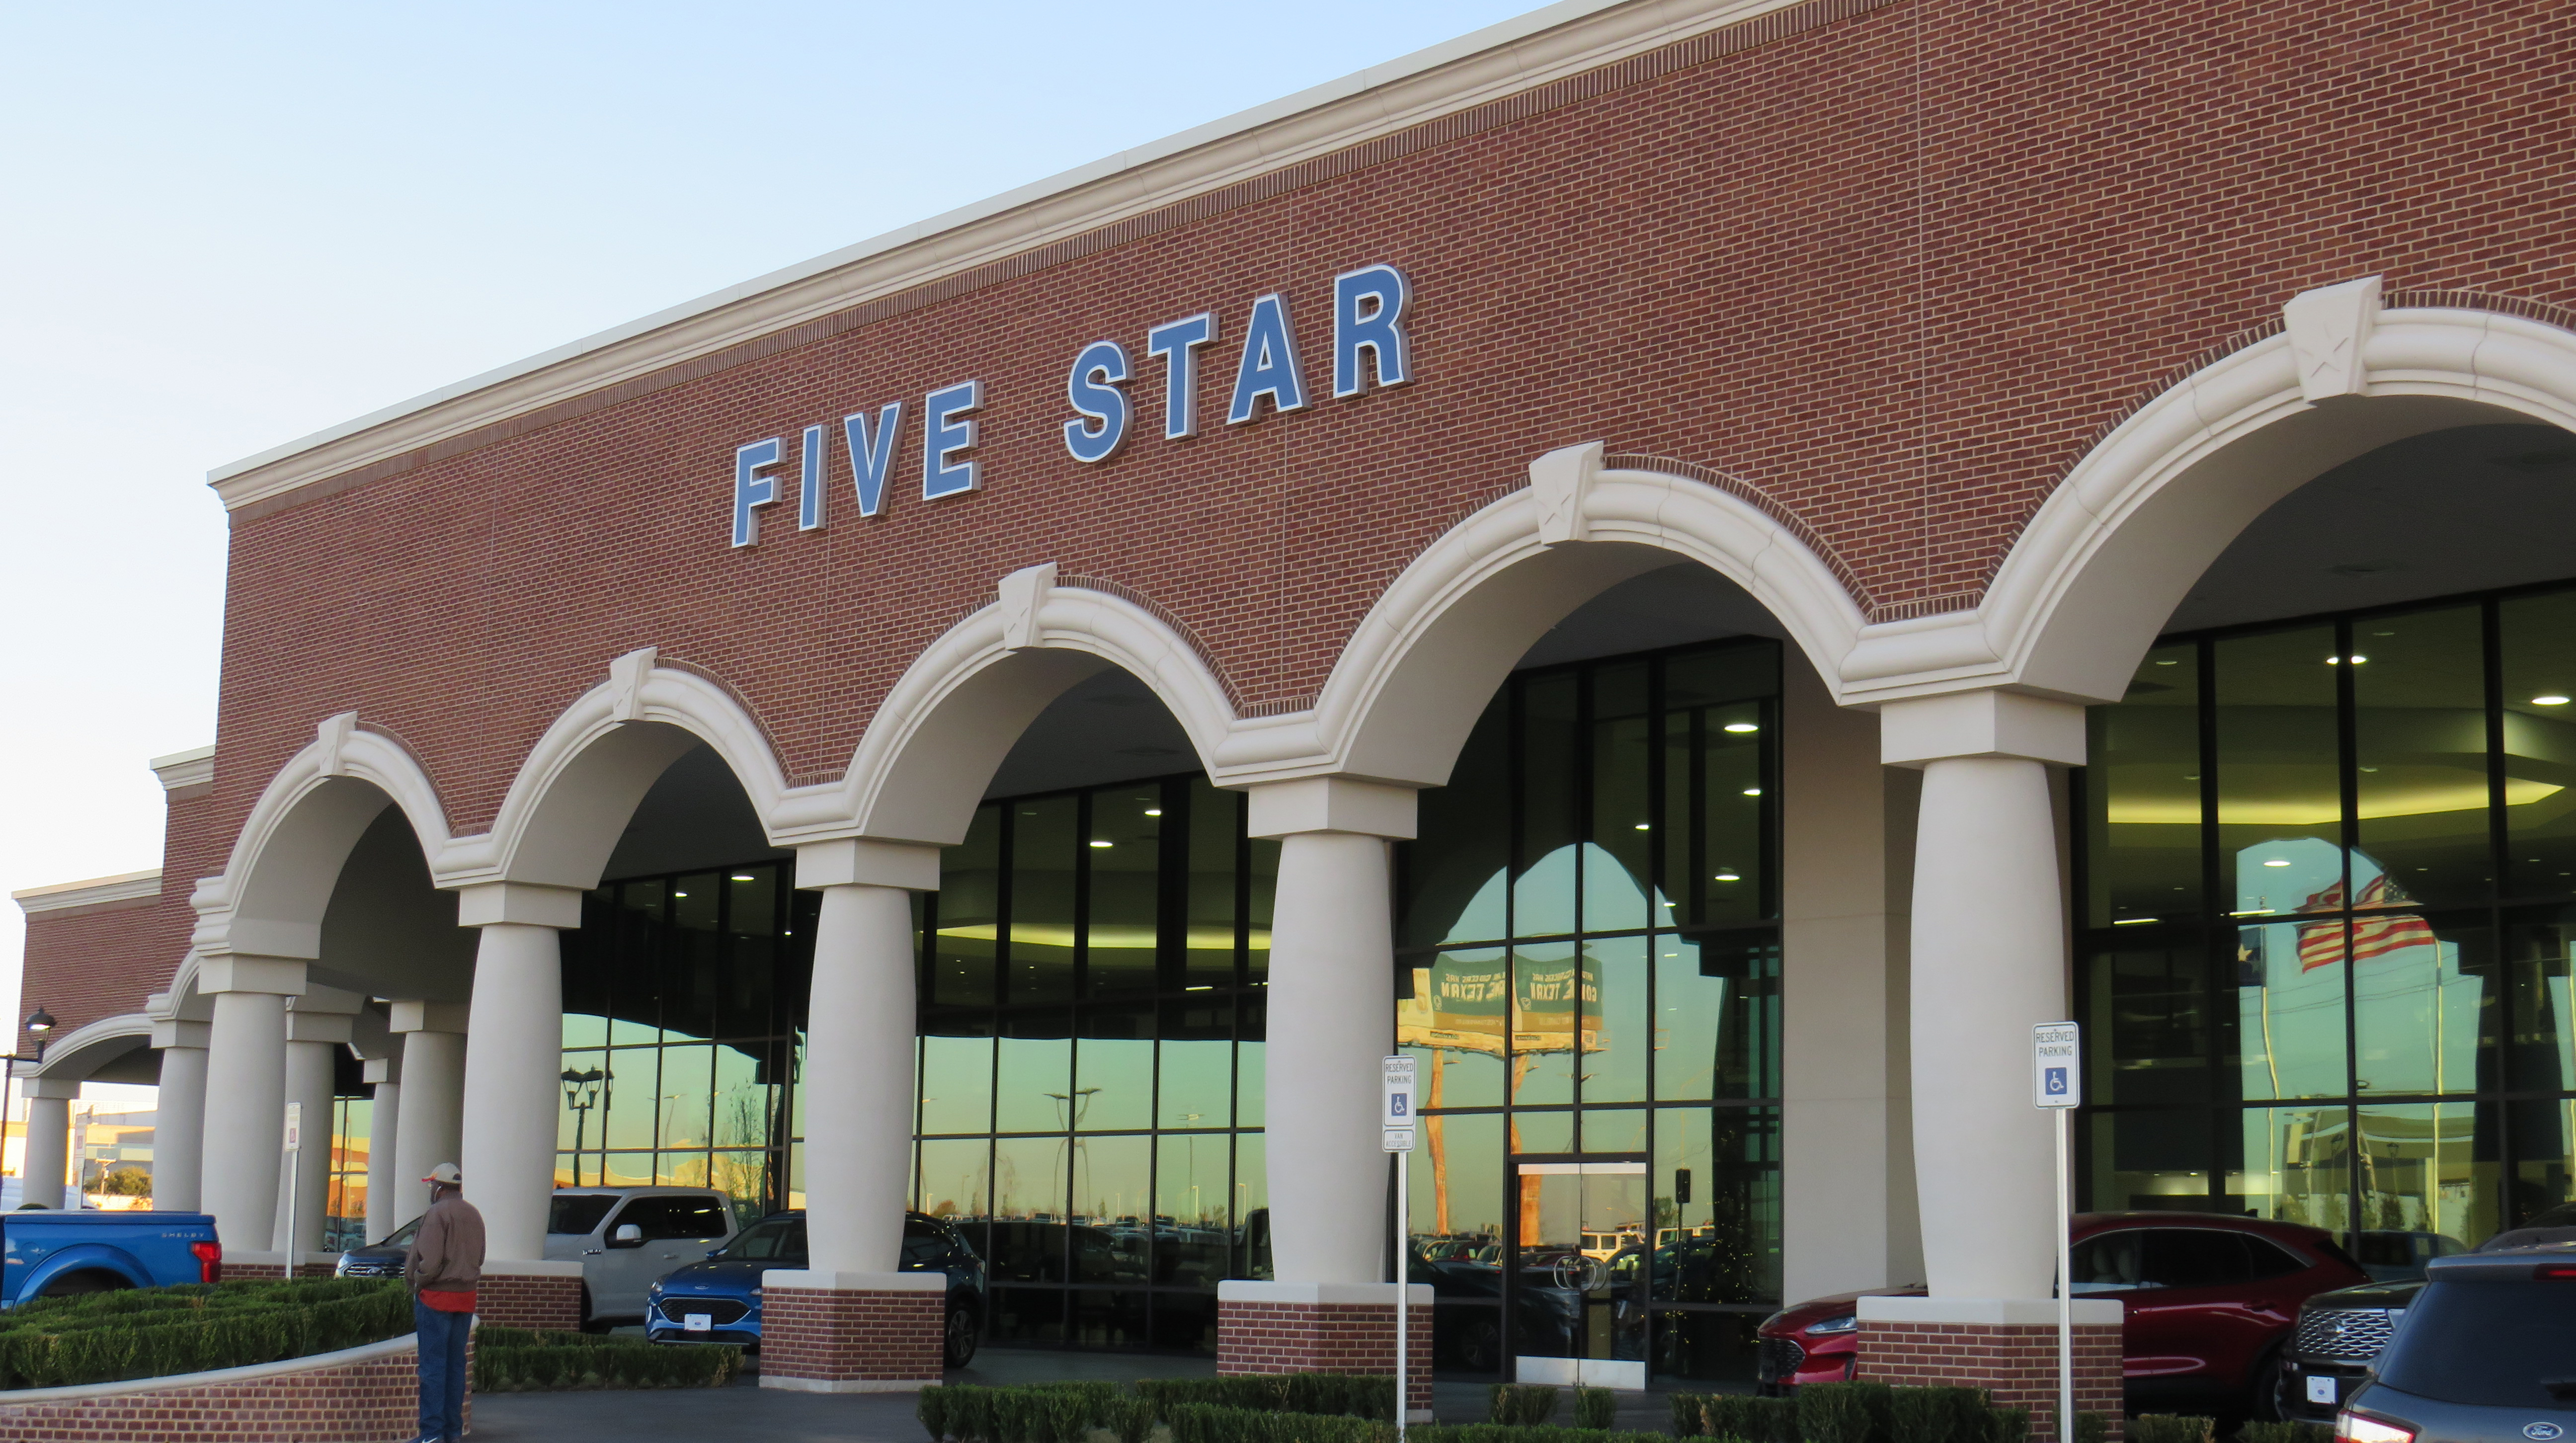 Five Star Ford in Dallas, Texas Teaser Image